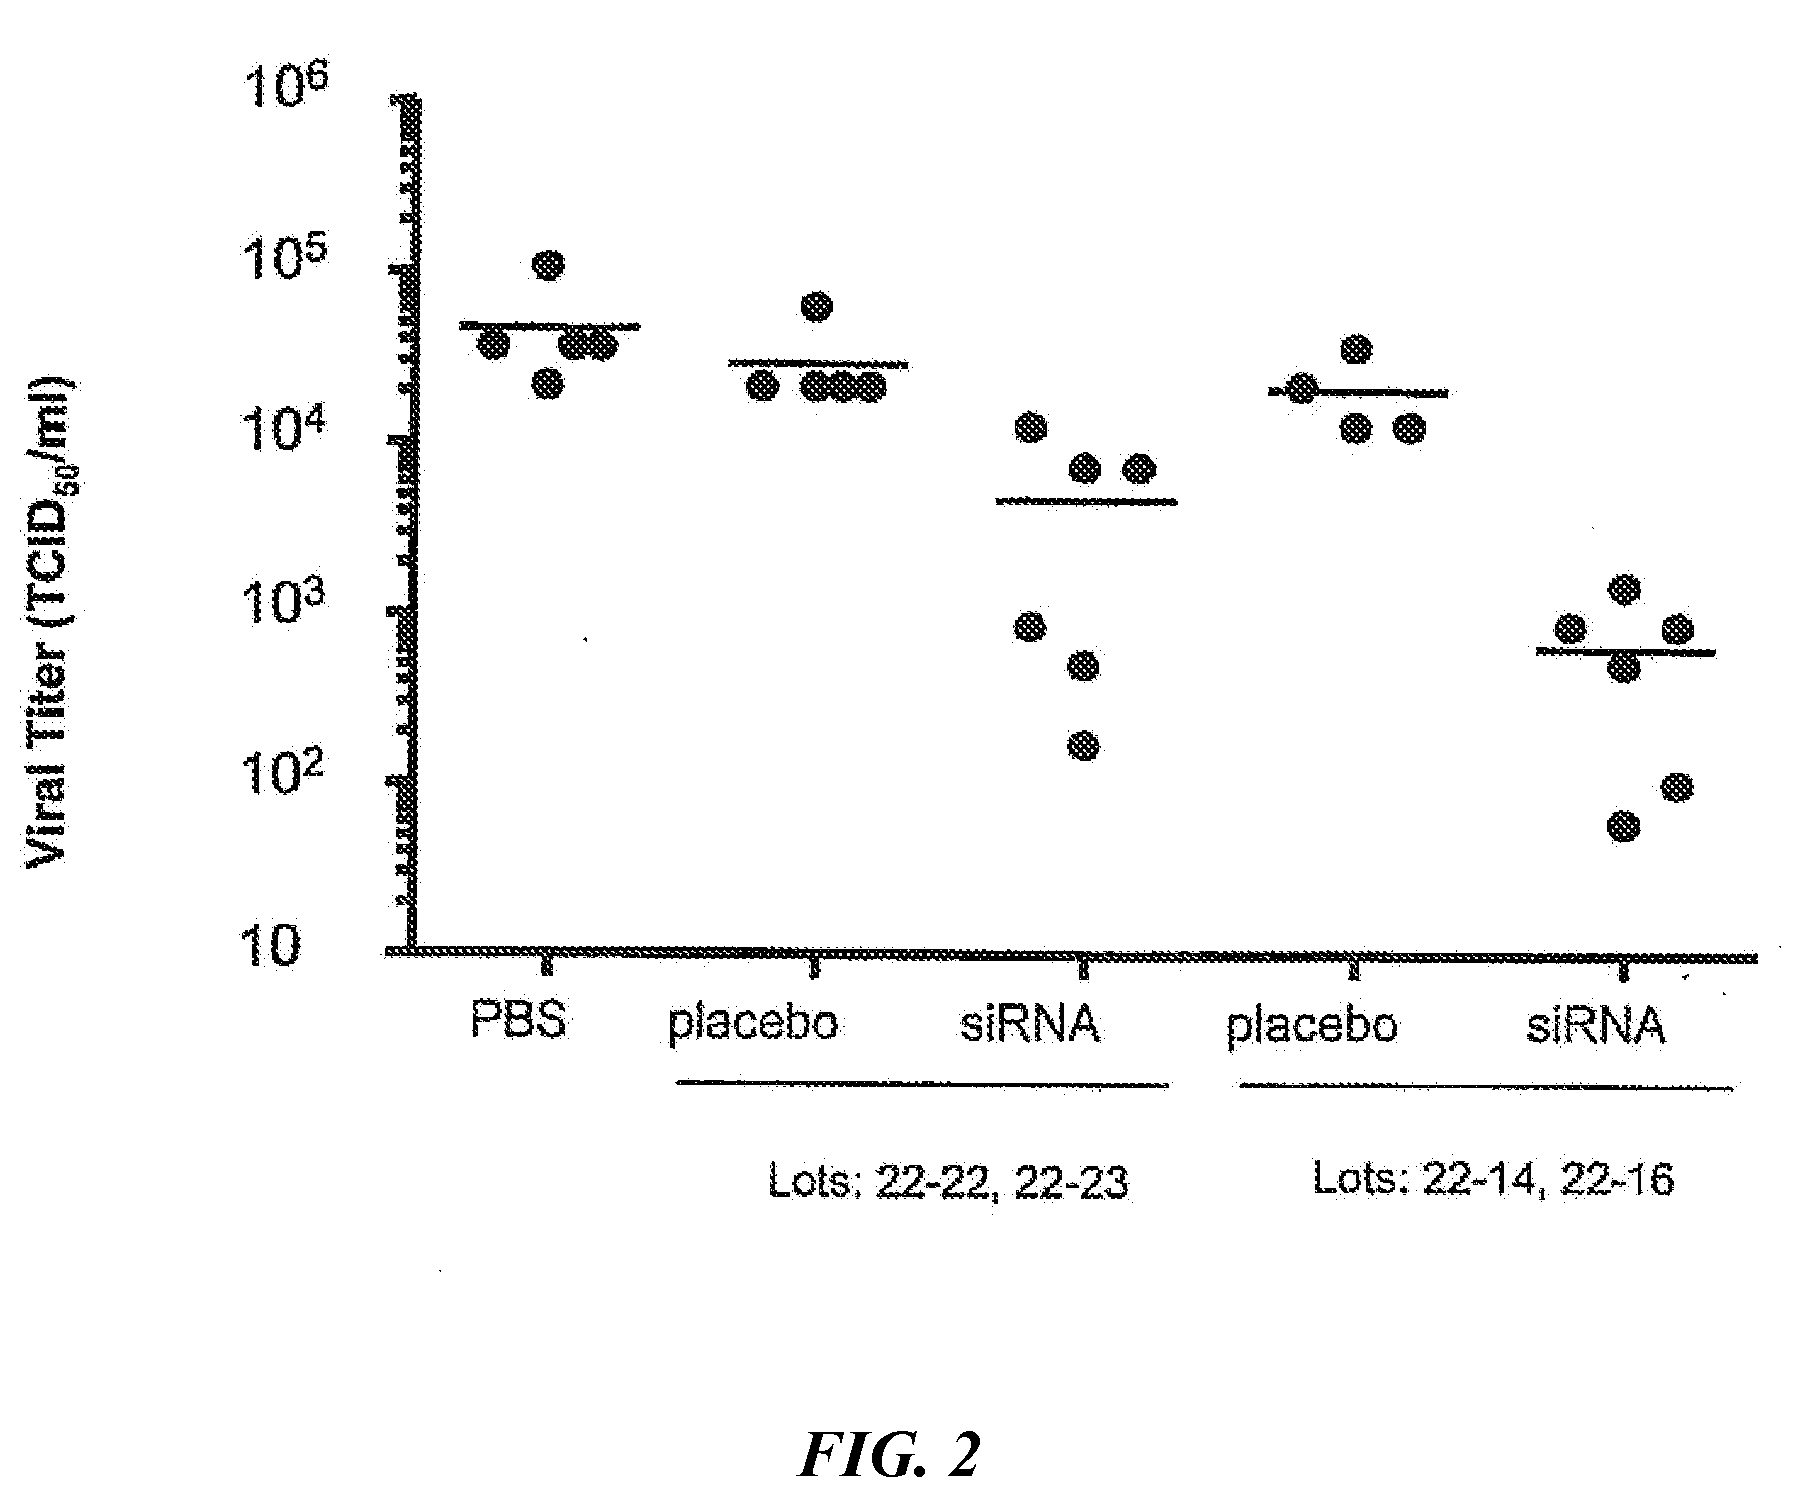 Dry powder compositions for RNA influenza therapeutics